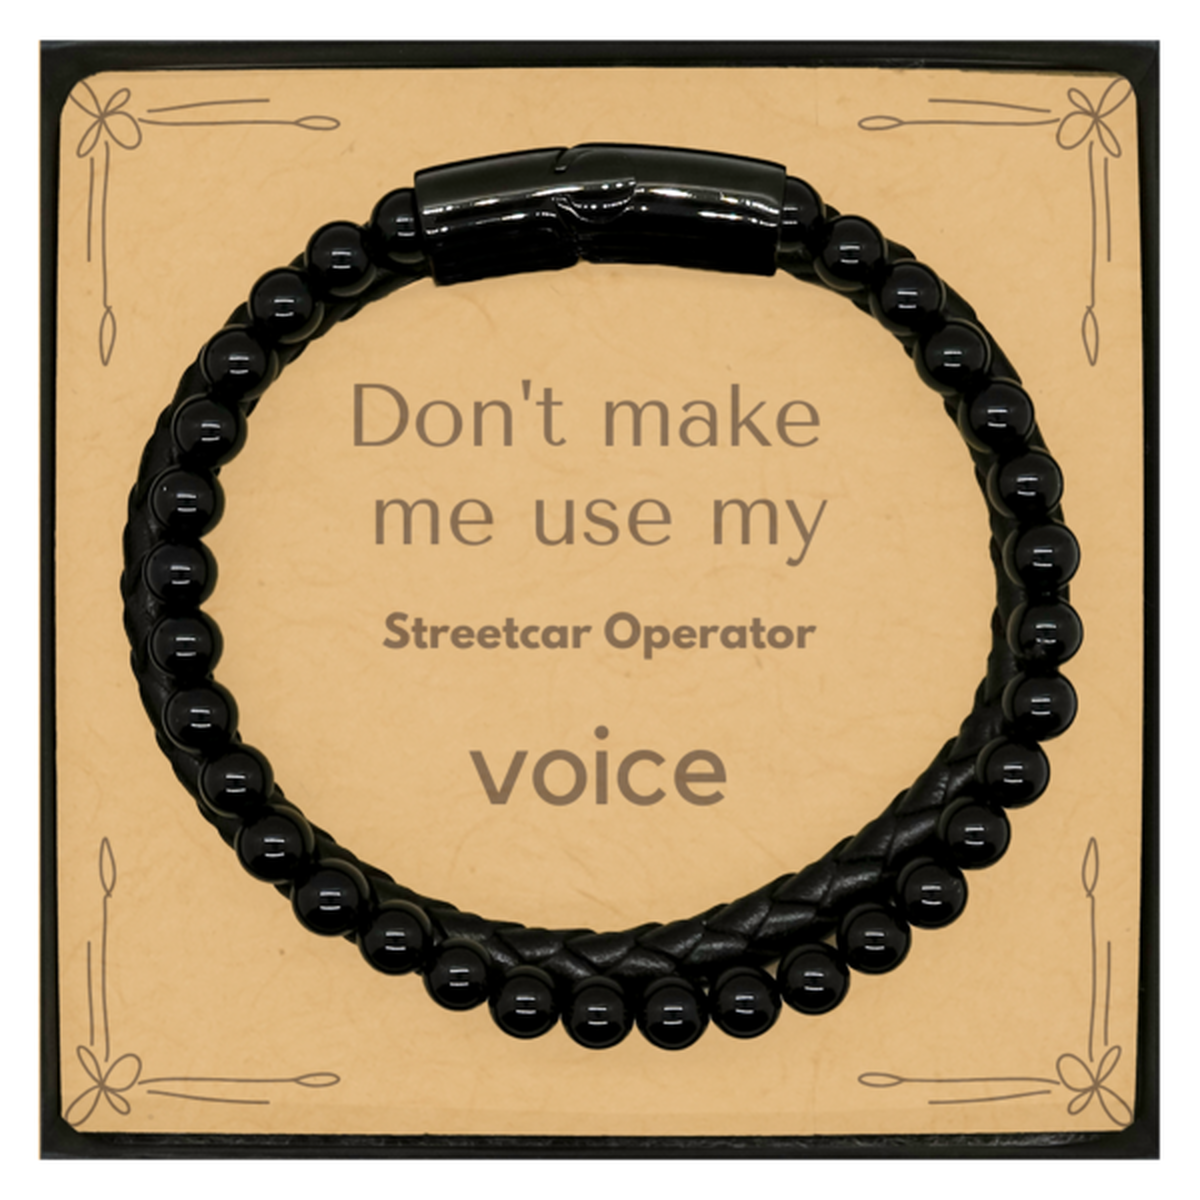 Don't make me use my Streetcar Operator voice, Sarcasm Streetcar Operator Card Gifts, Christmas Streetcar Operator Stone Leather Bracelets Birthday Unique Gifts For Streetcar Operator Coworkers, Men, Women, Colleague, Friends